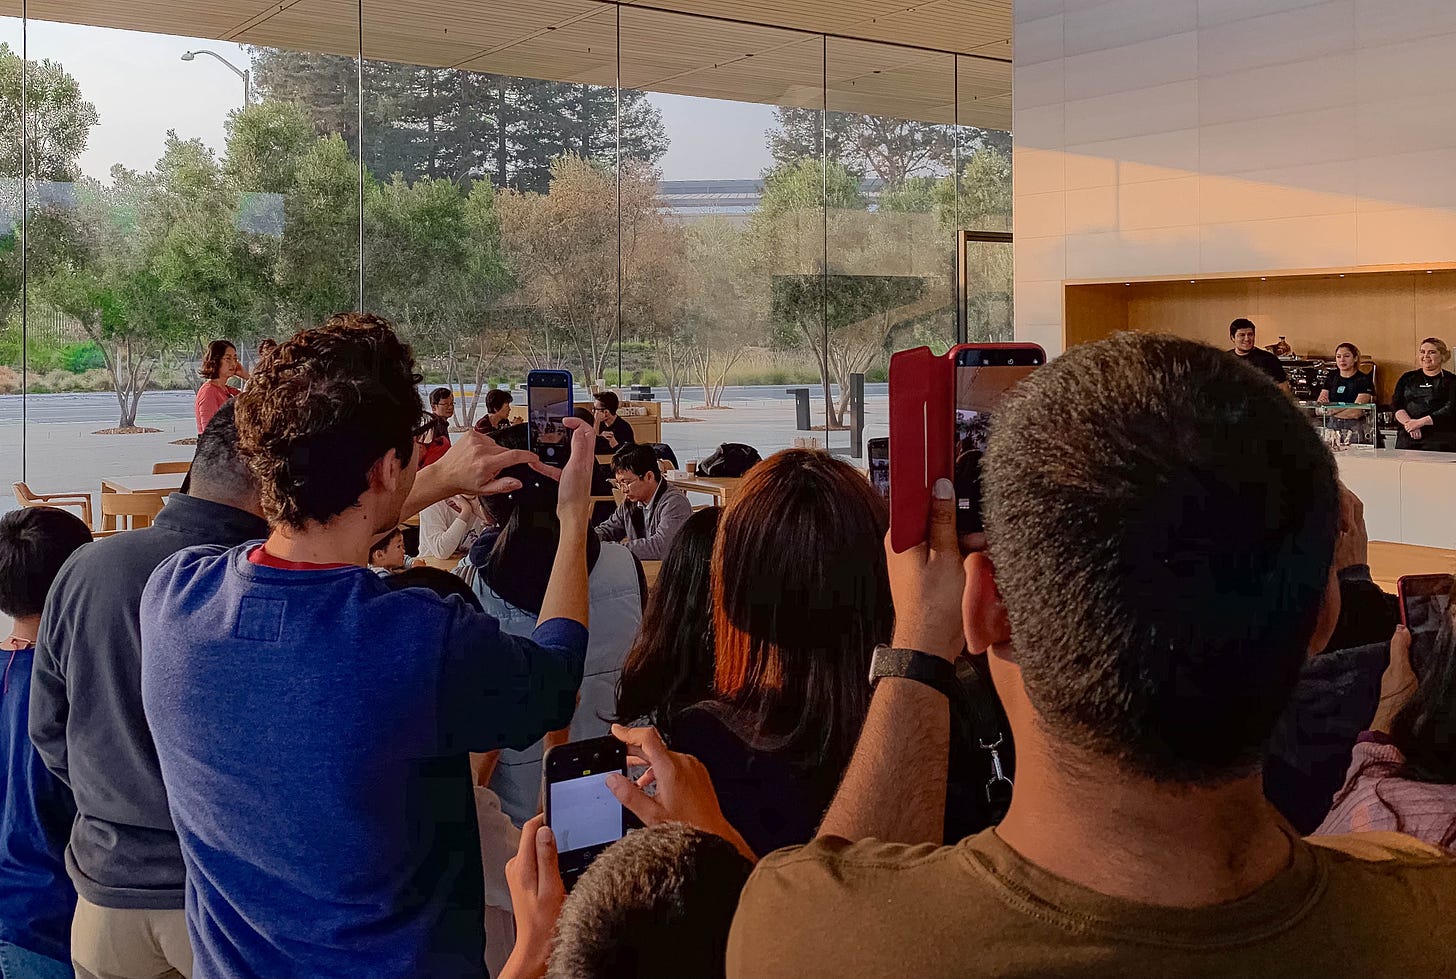 People at Apple Park Visitor Center shoot photos in the cafe during a Today at Apple Photo Walk.